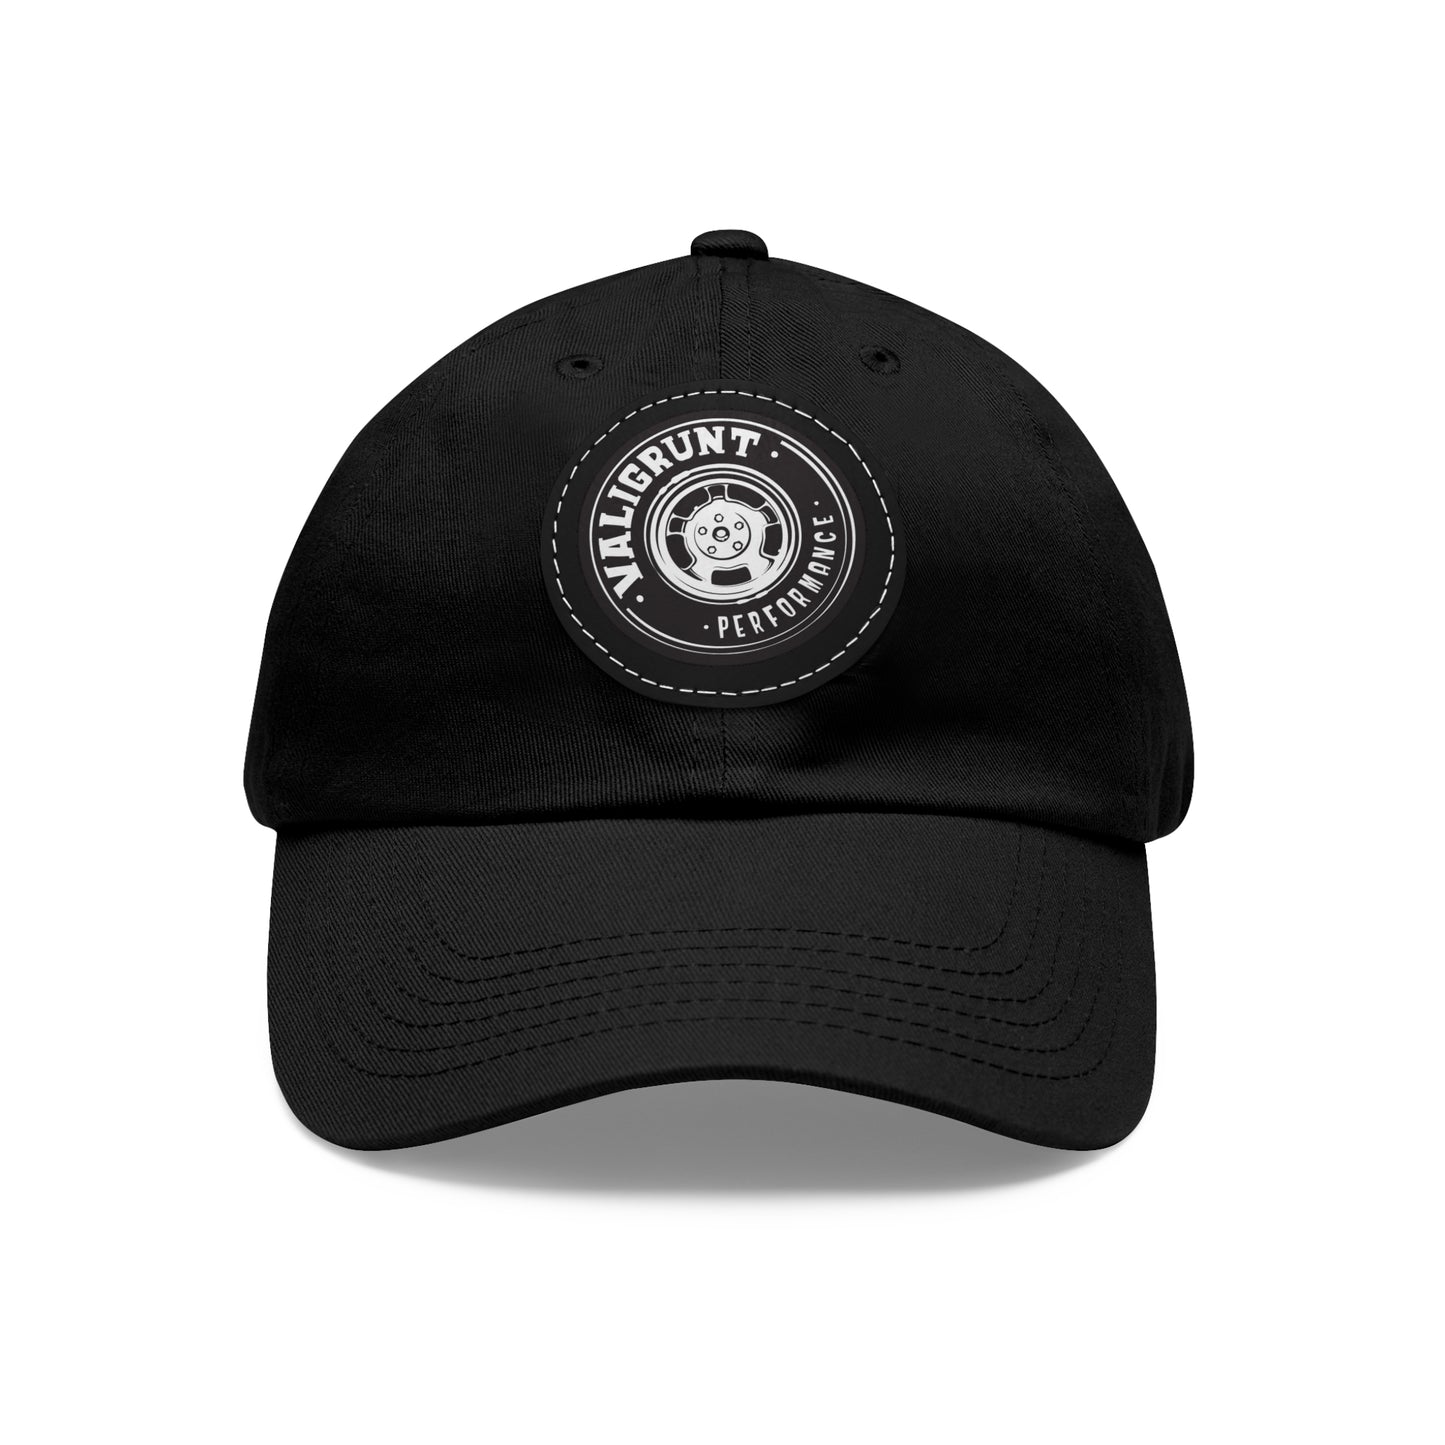 Valigrunt Performance Cap with Leather Patch (Round)